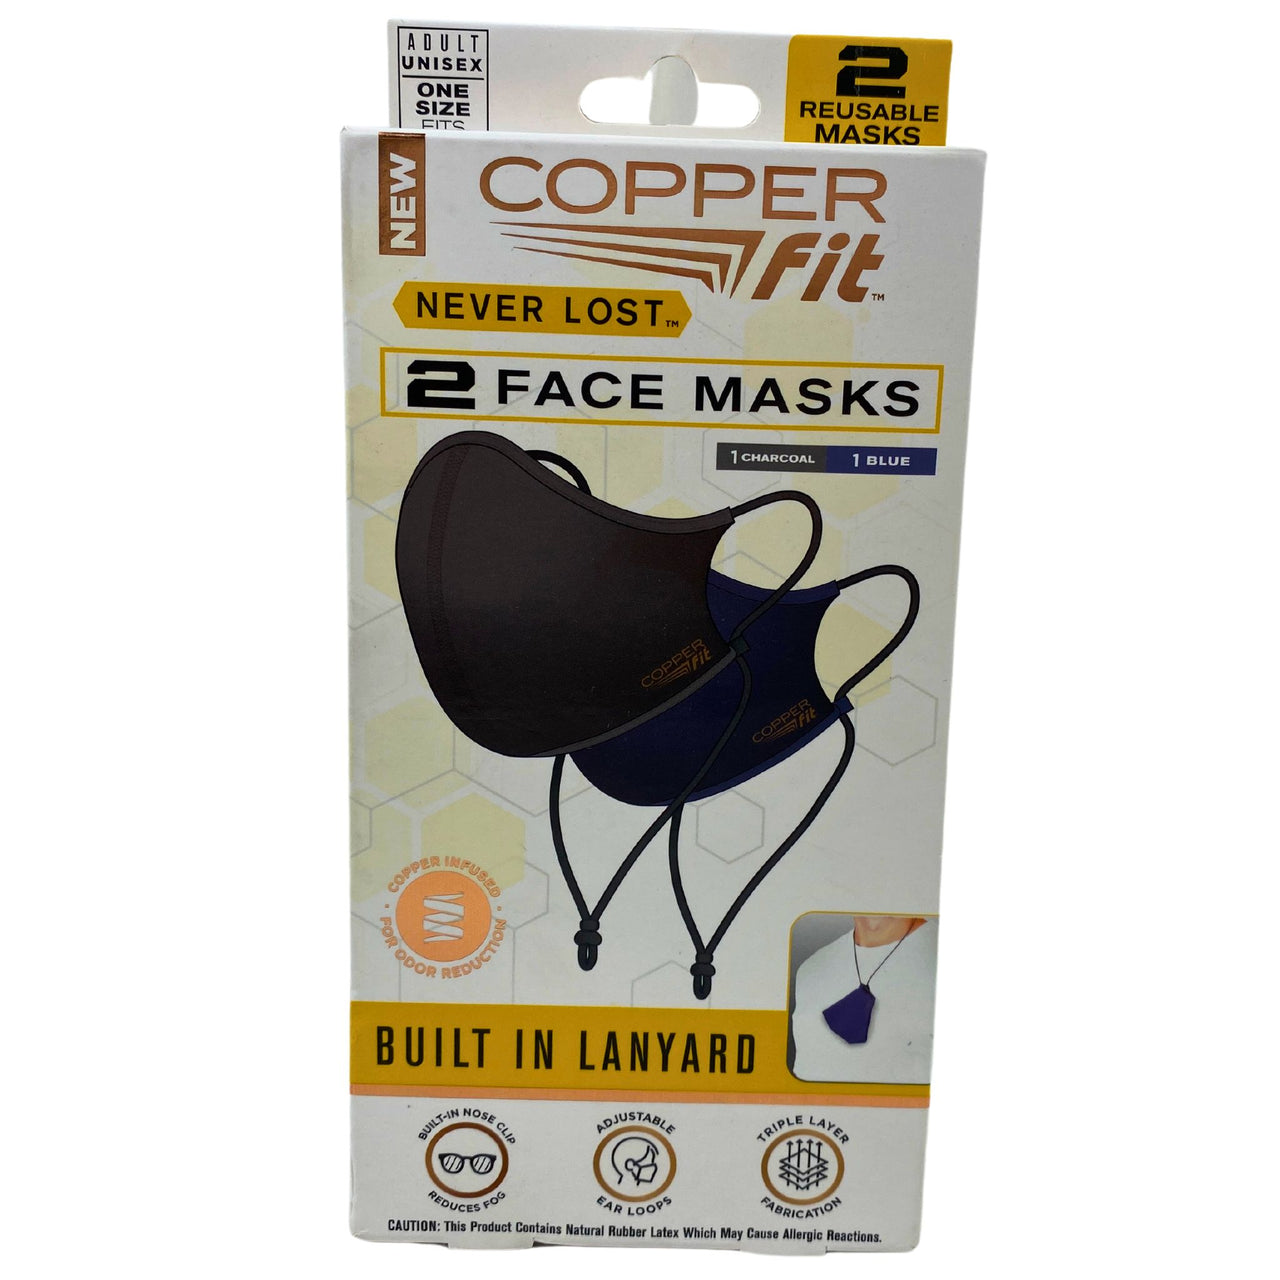 COPPERfit Never Lost 2 Face Masks 1 Charcoal & 1 Blue Buillt In Lanyard 